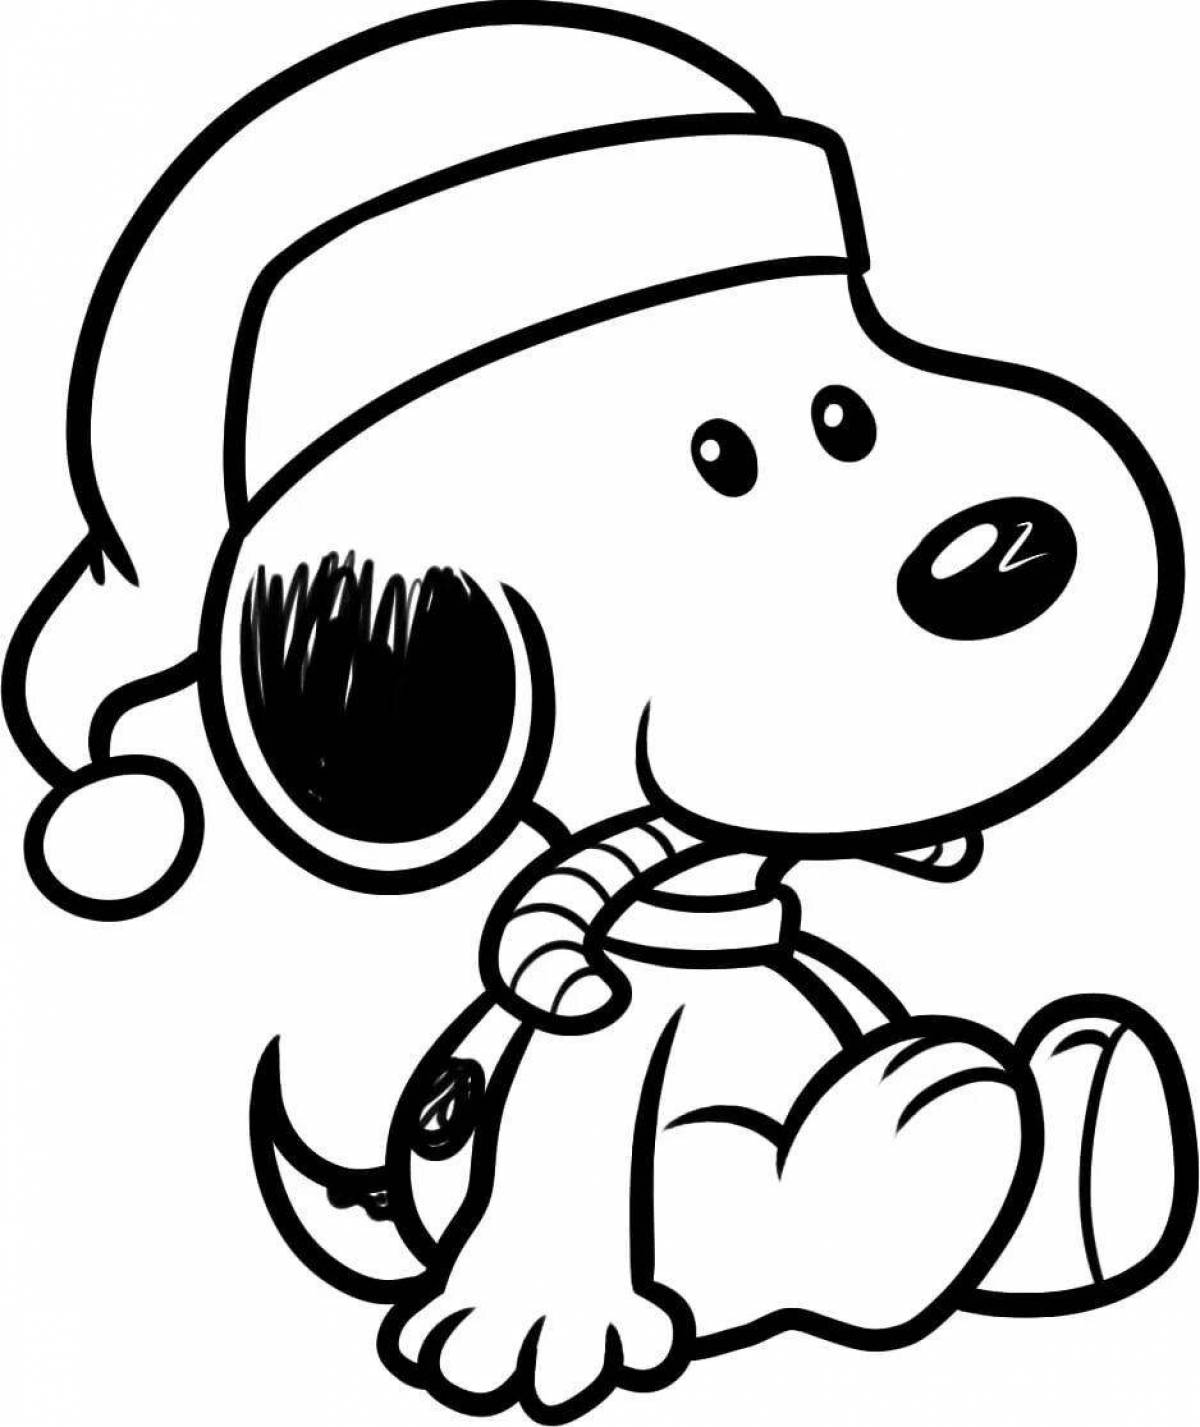 Colorful Christmas dog coloring book